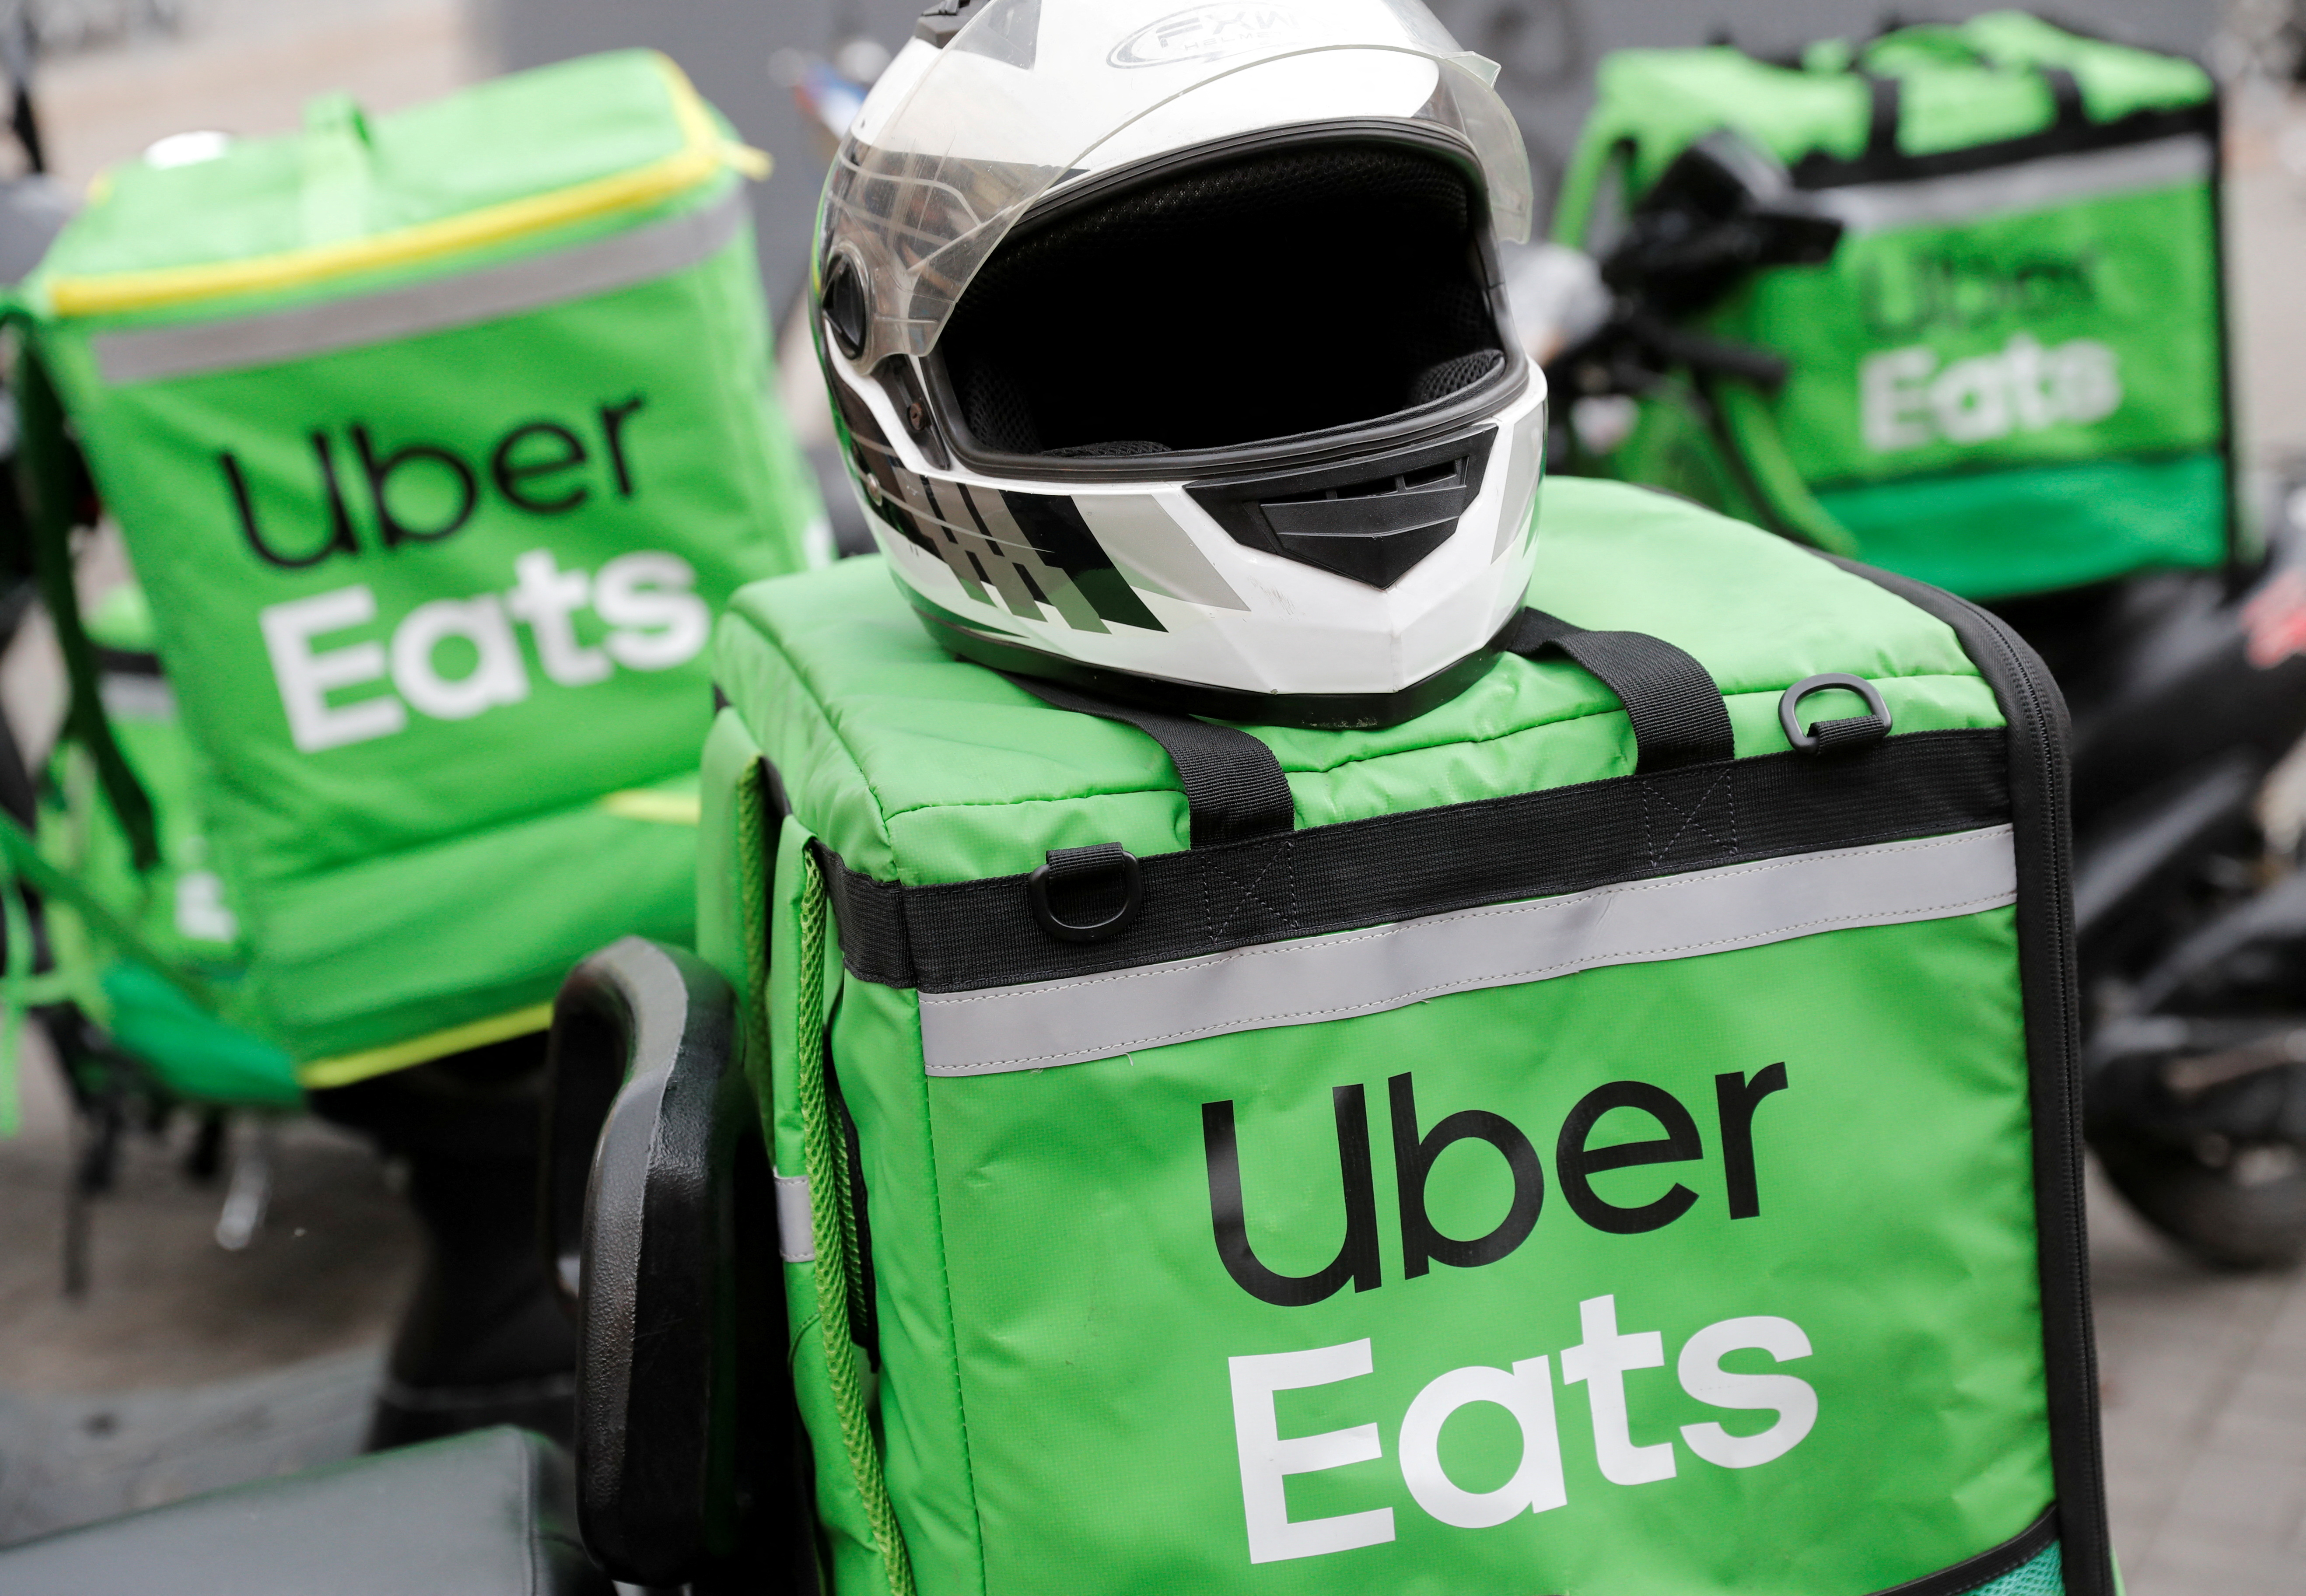 Delivery bags with logos of Uber Eats are seen on a street in central Kiev